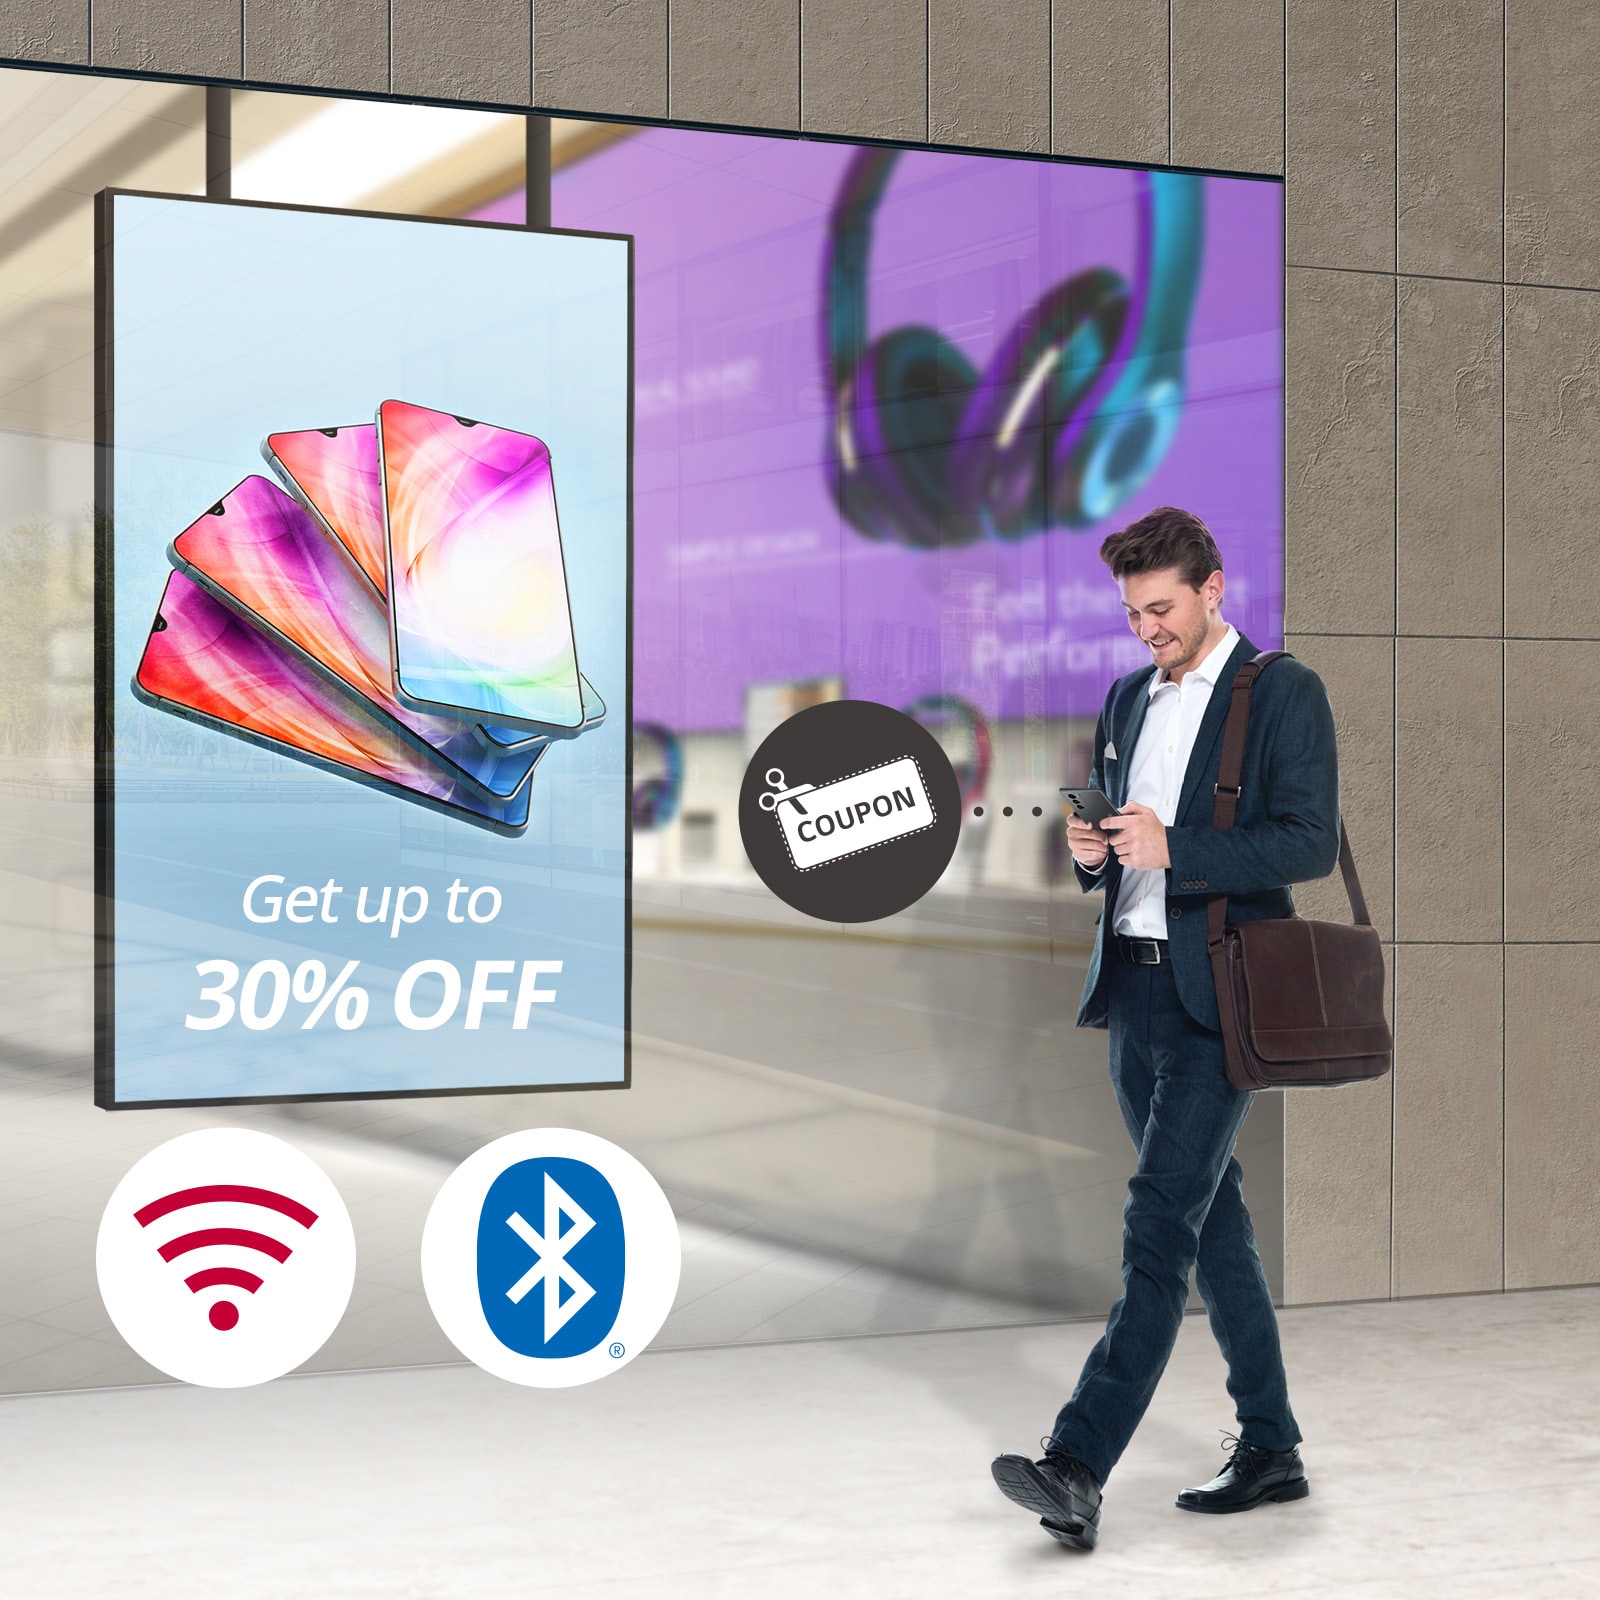 A visitor is receiving promotional coupon in real time through Wi-Fi, Bluetooth, and Beacon built into the display.